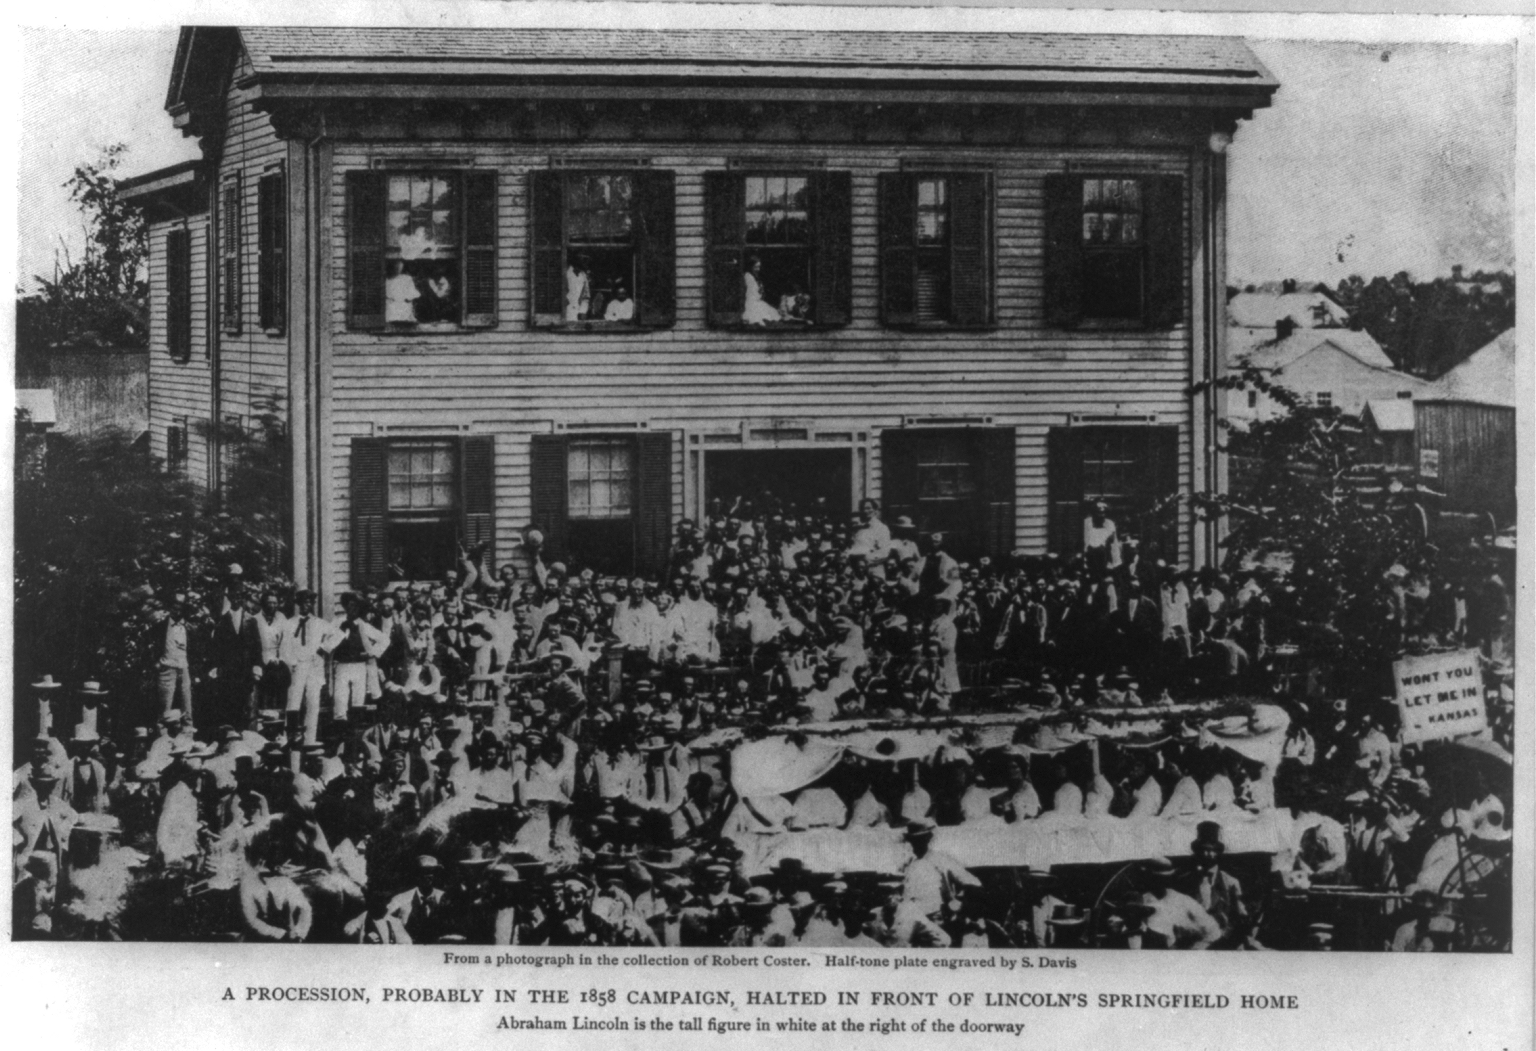 Black and white photo of Lincoln Home with a crowd of Lincoln political supporters and admirers gathered on street out front and house steps